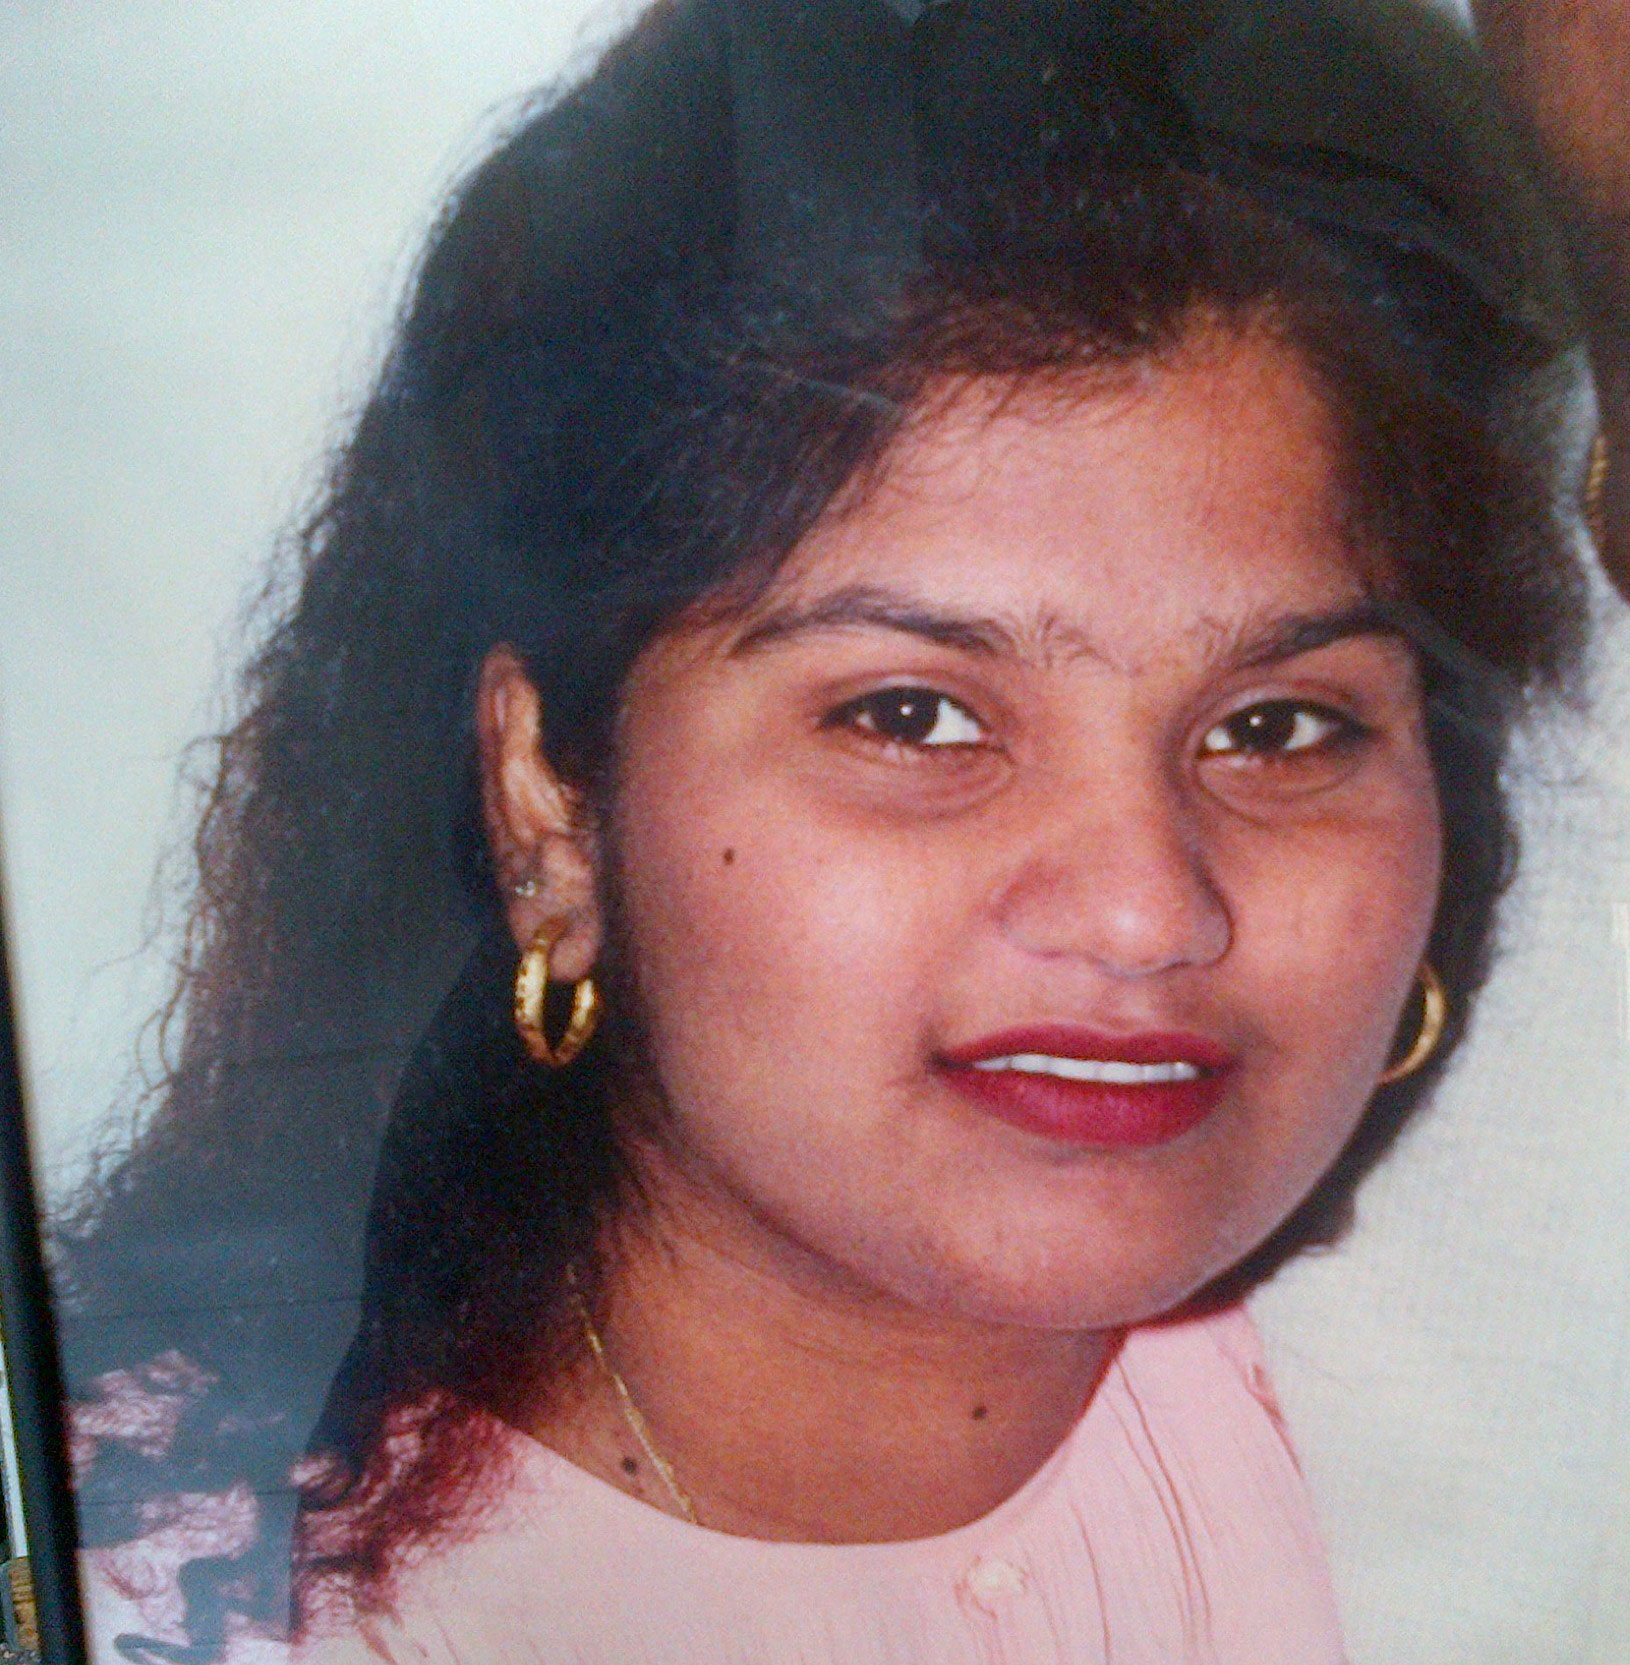 Acid attack victim Monika Chetty likely died protecting attacker, inquest finds